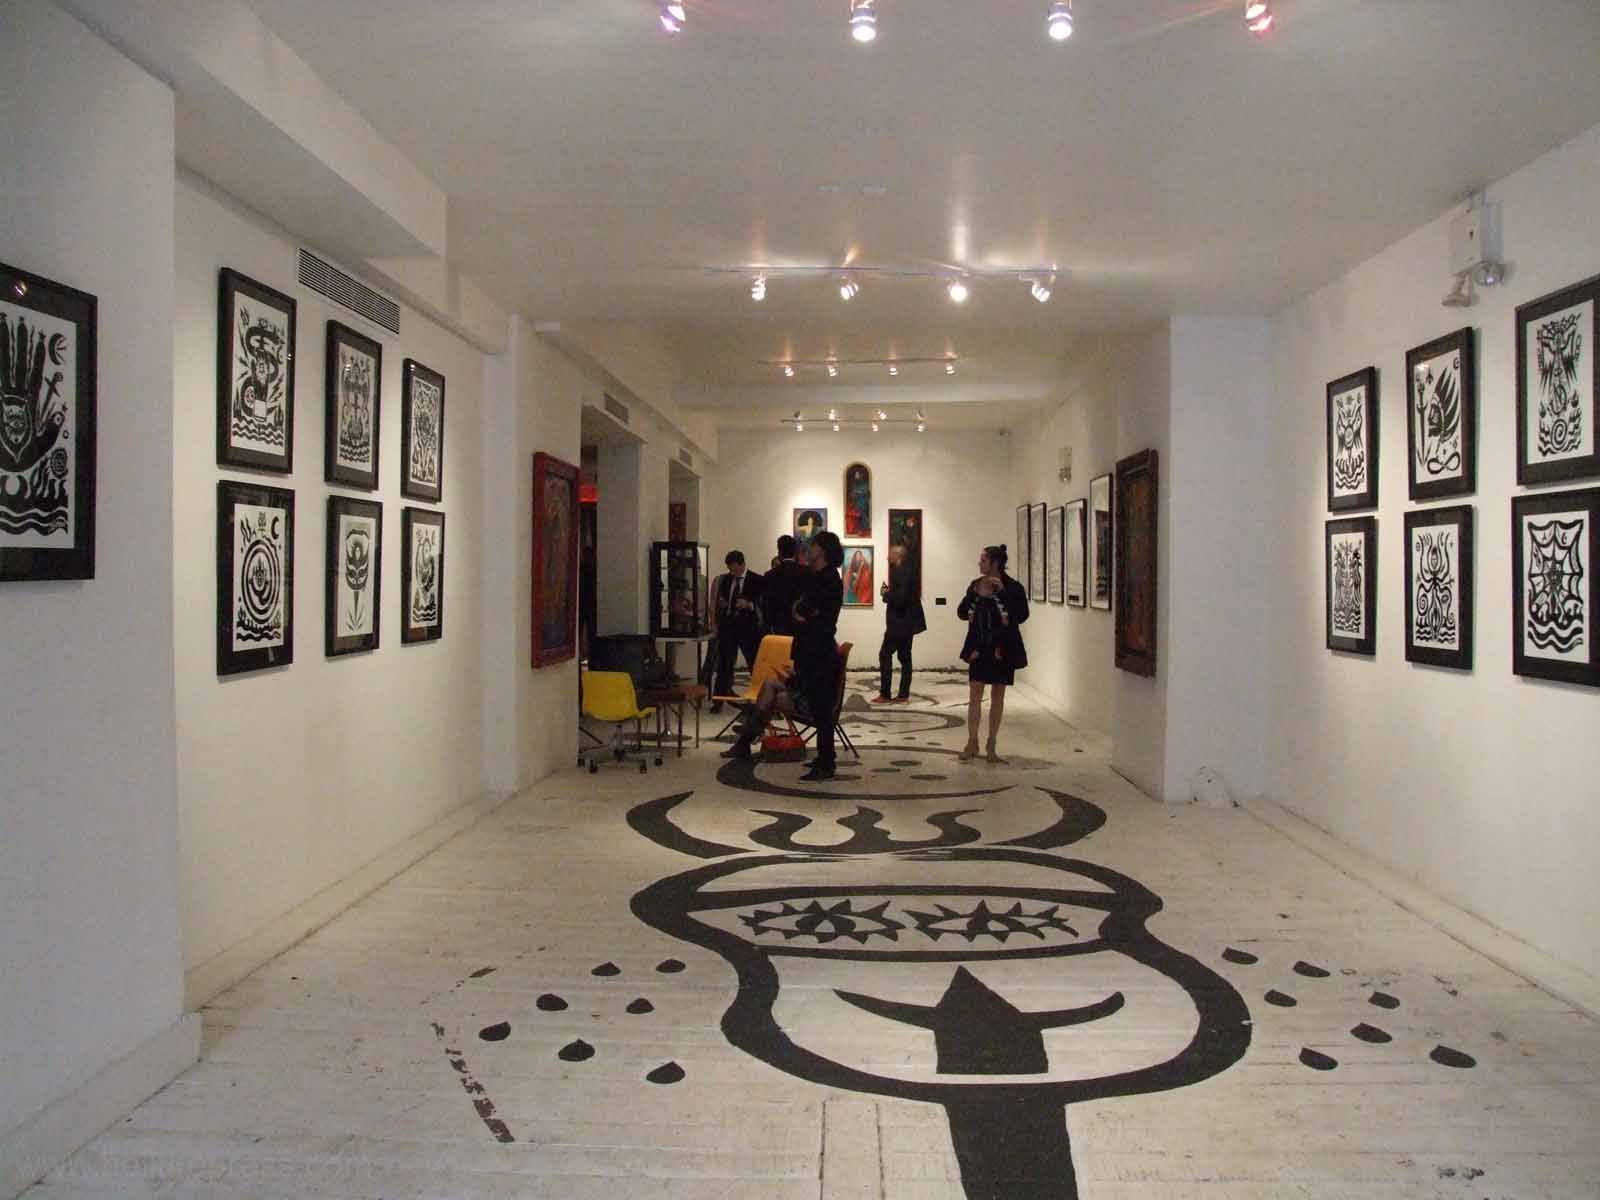 Patterson painted the floors with his art for show.